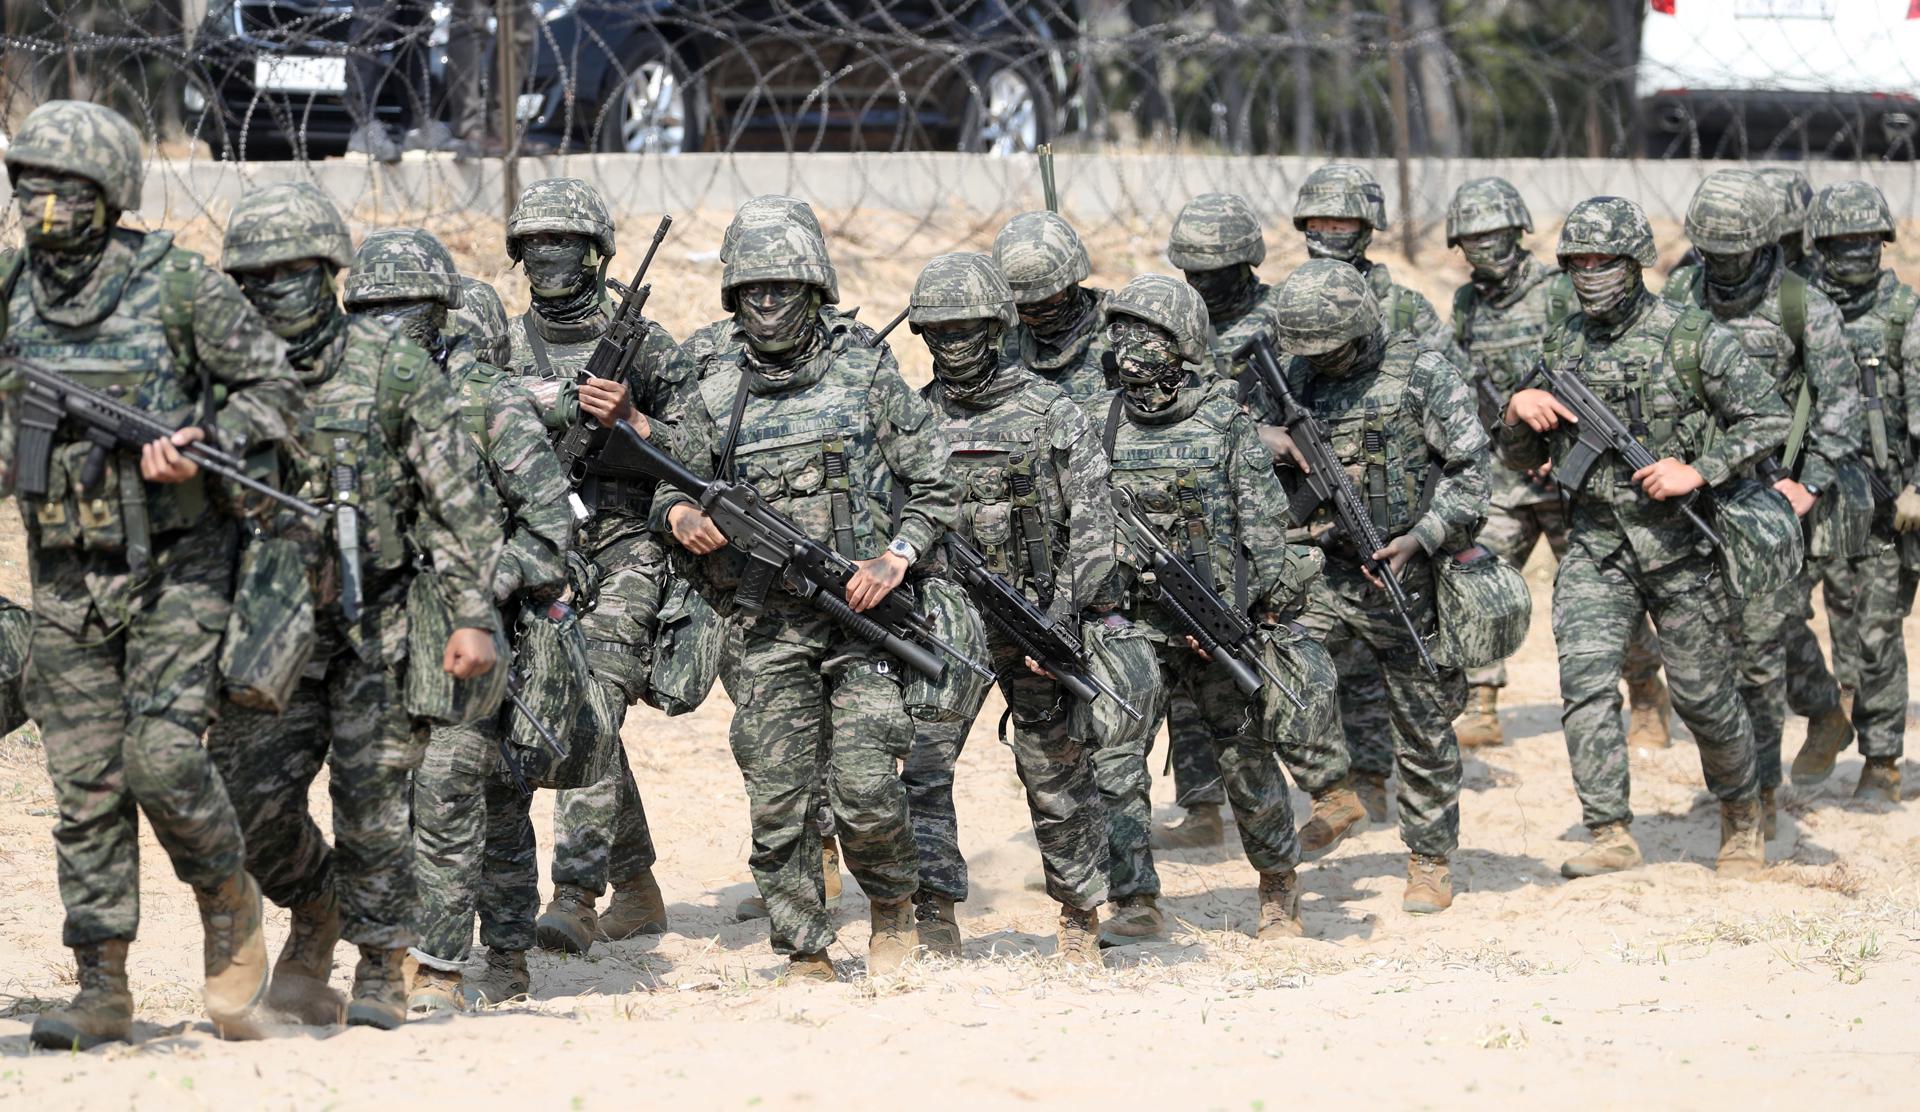 South Korean and US Marines take part in a joint drill at a training range in Pohang, South Korea, 29 March 2023, as part of the ongoing South Korea-US Ssangyong amphibious landing exercise that began on 20 March. EFE-EPA/YONHAP SOUTH KOREA OUT